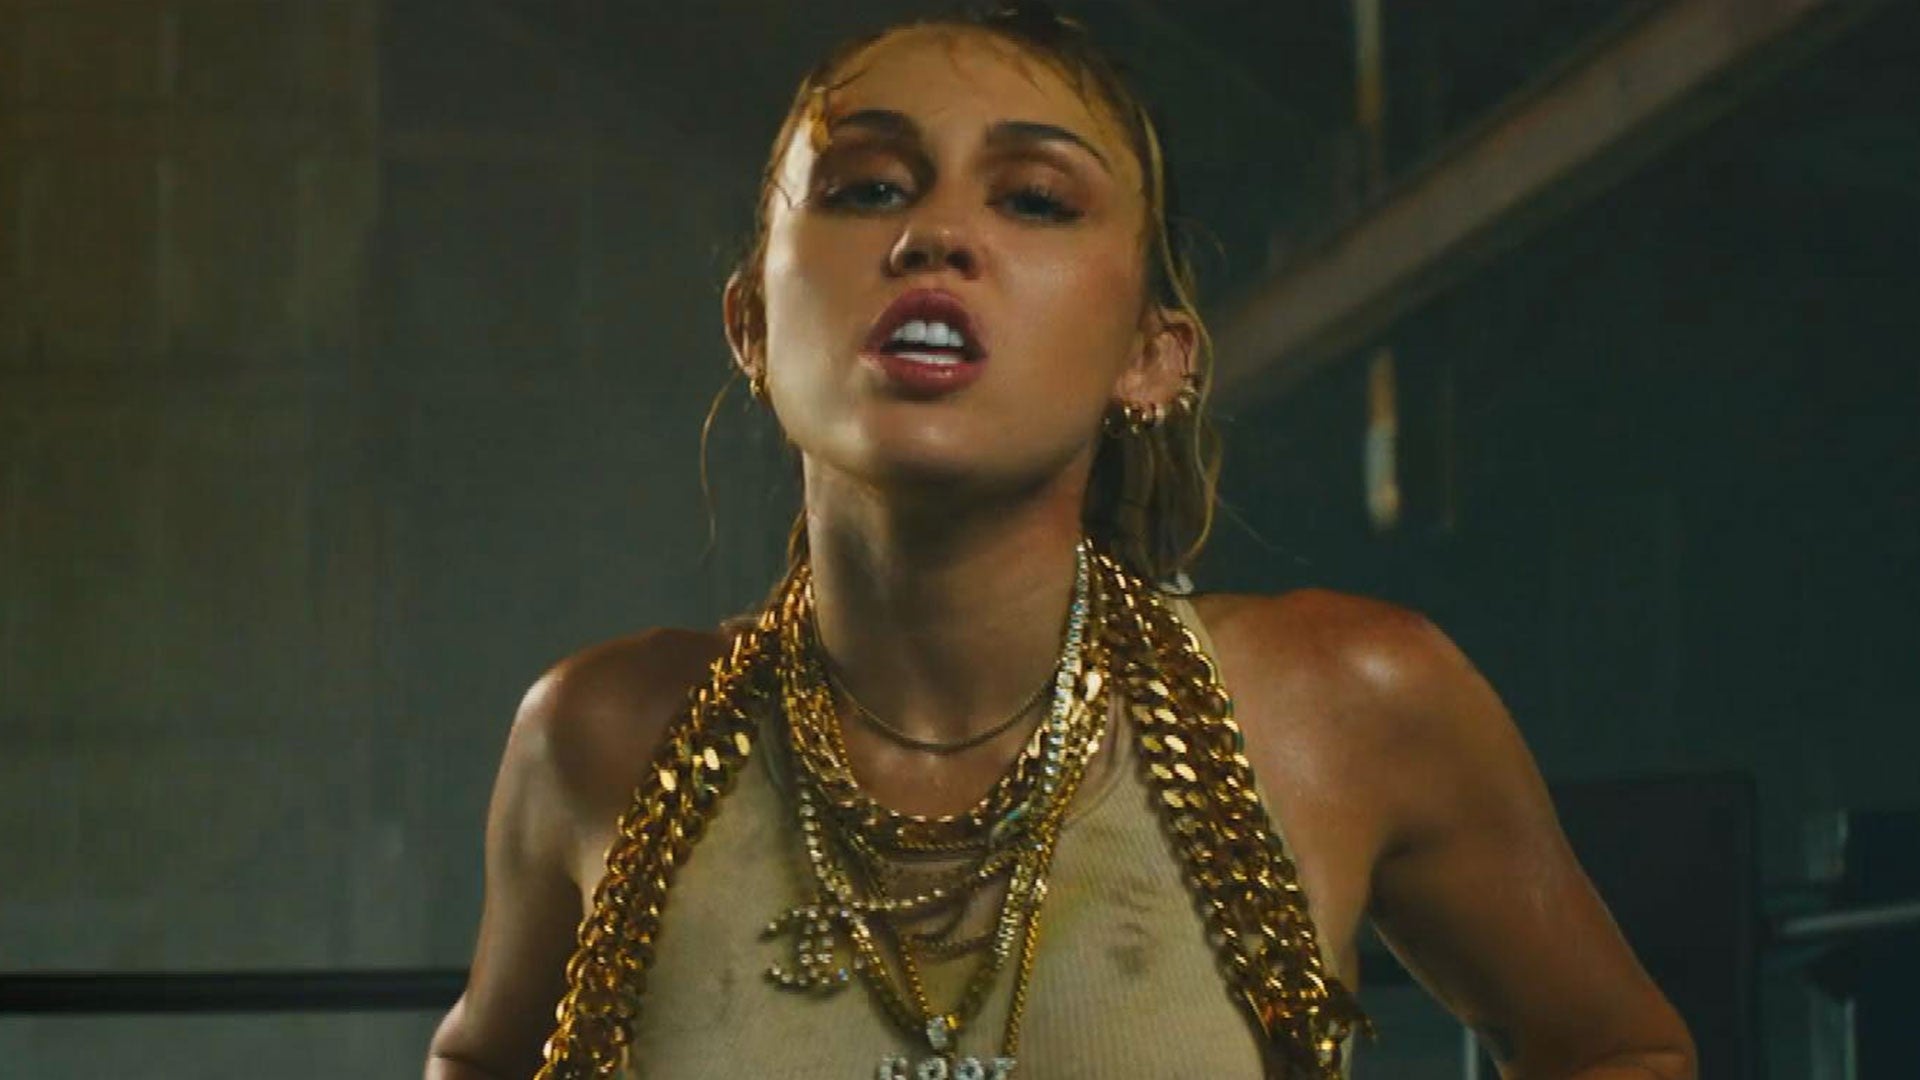 Why Fans Think Miley Cyrus Is Shading Liam Hemsworth In Don